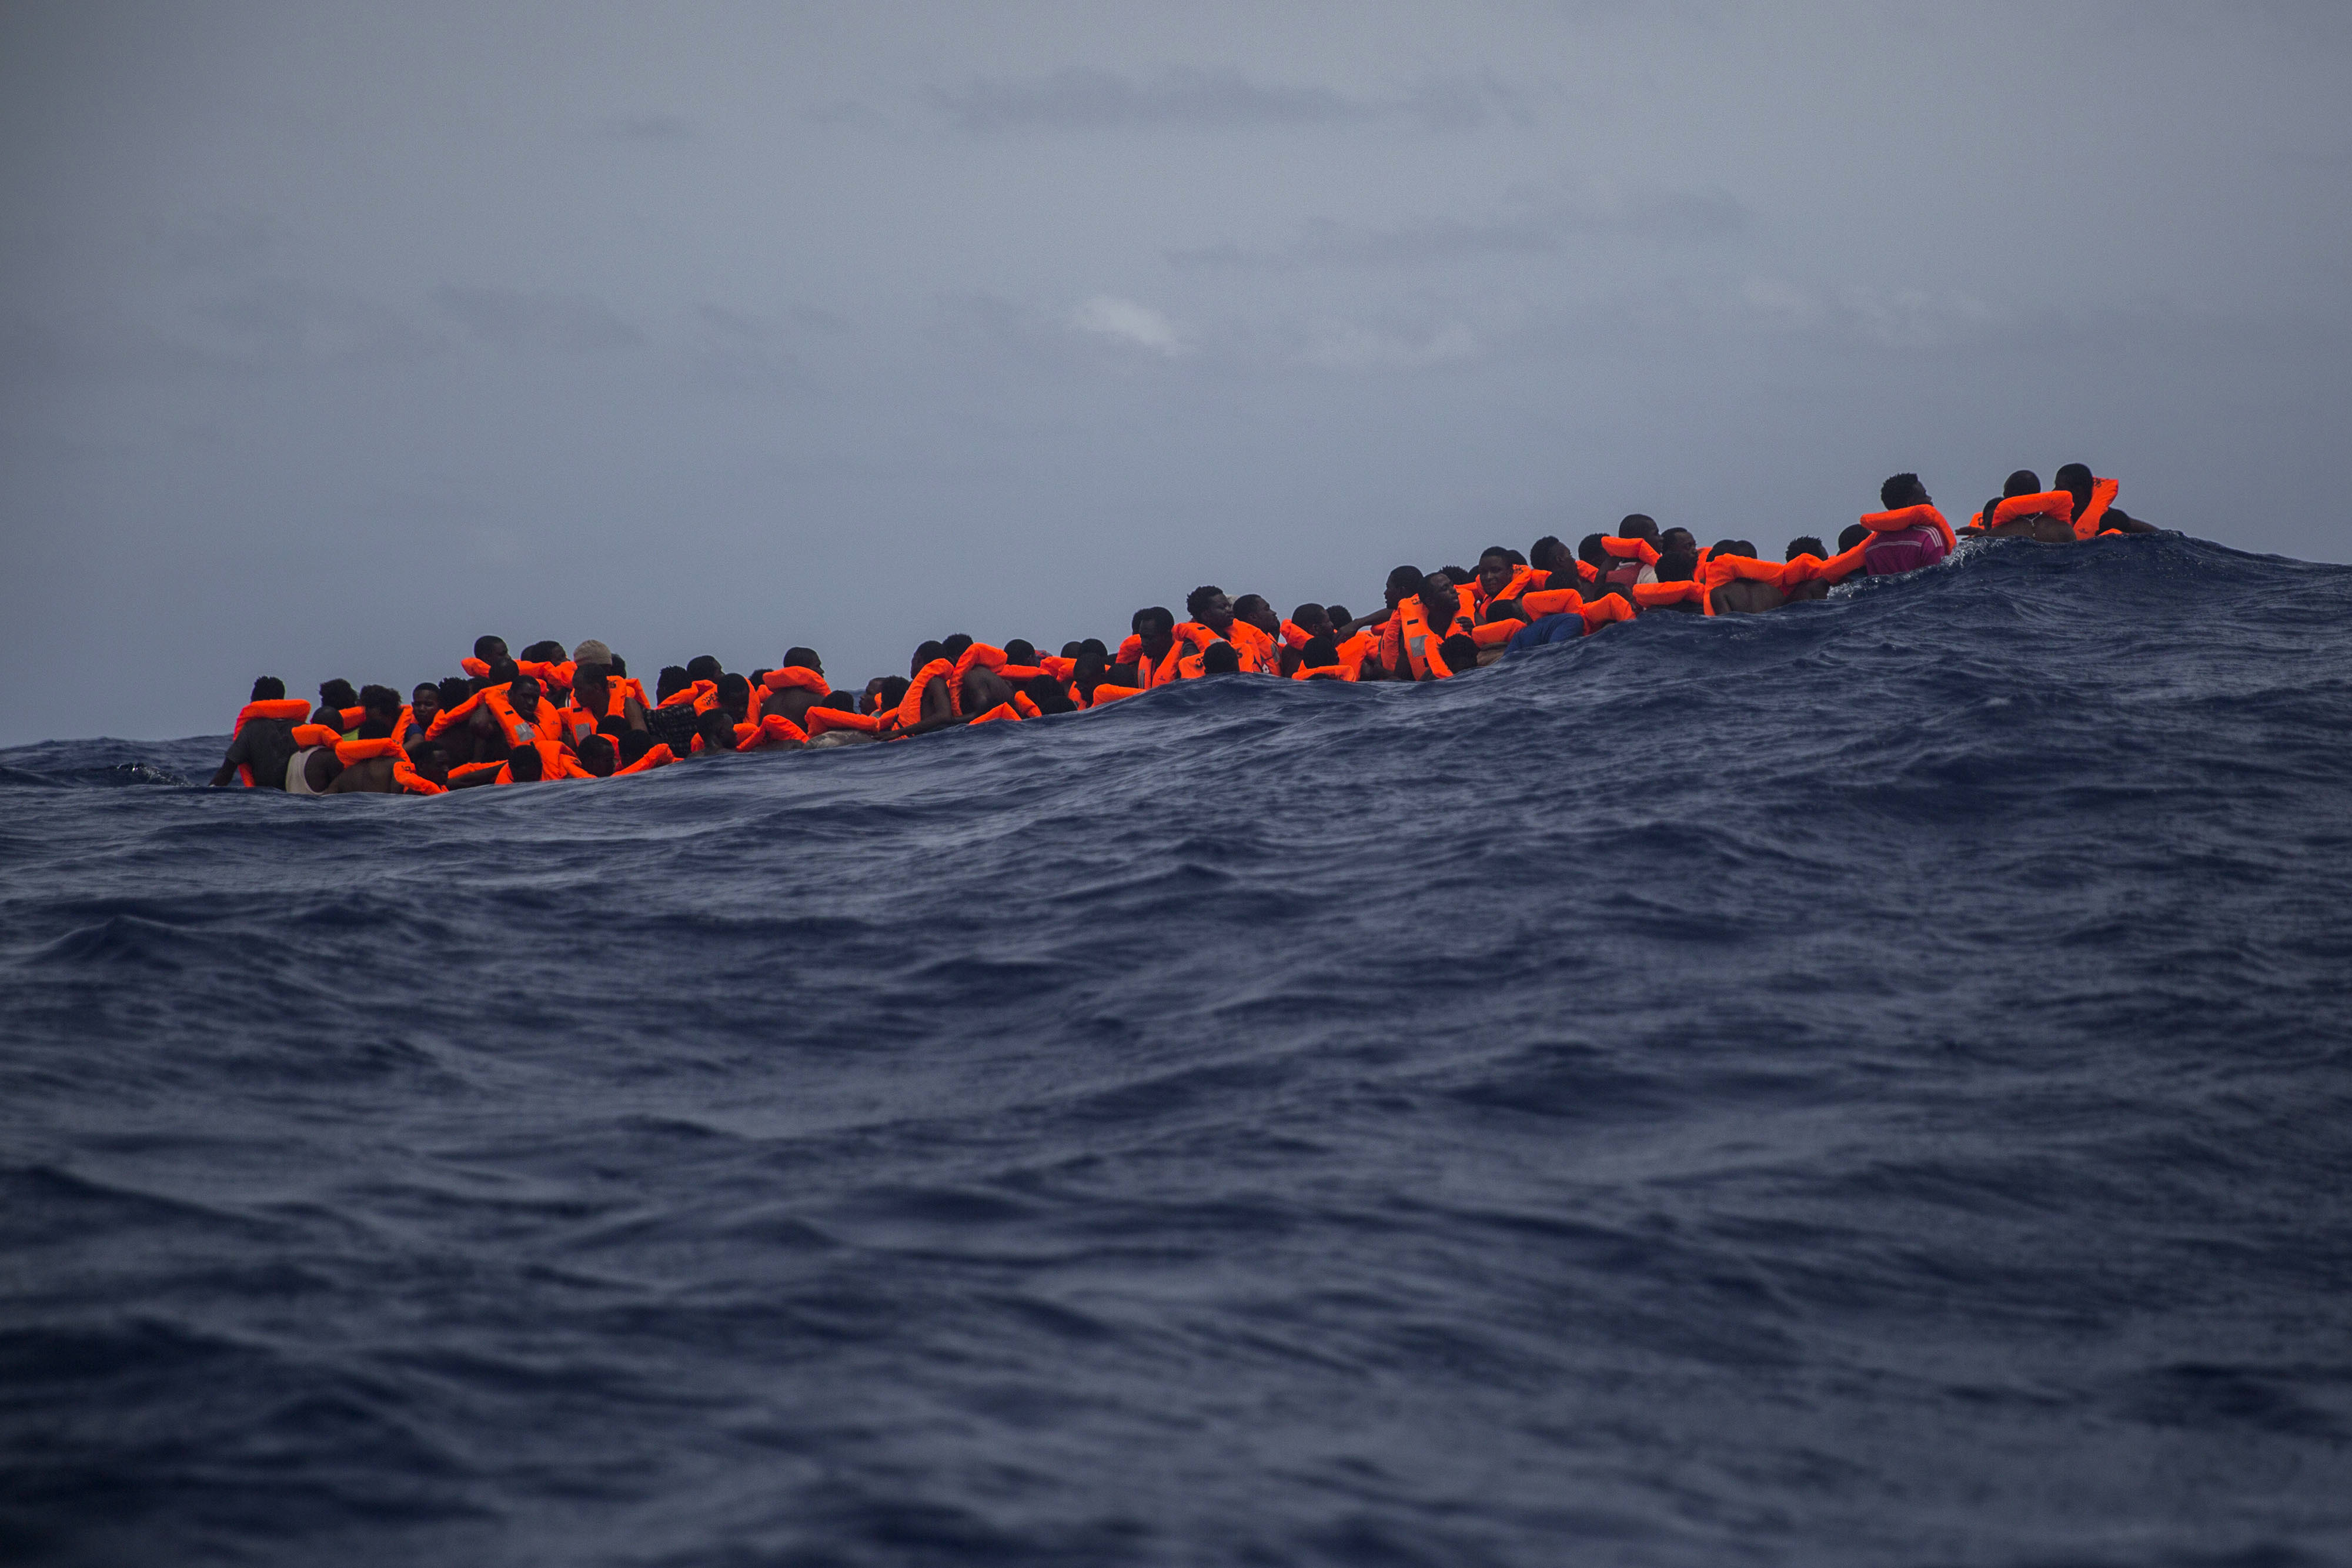 Sub saharan migrants wait to be rescued by aid workers of Spanish NGO Proactiva Open Arms in the Mediterranean Sea, about 15 miles north of Sabratha, Libya on Tuesday, July 25, 2017. More than 120 migrants were rescued Tuesday from the Mediterranean Sea while 13 more —including pregnant women and children— died in a crammed rubber raft, according to a Spanish rescue group. (AP Photo/Santi Palacios)